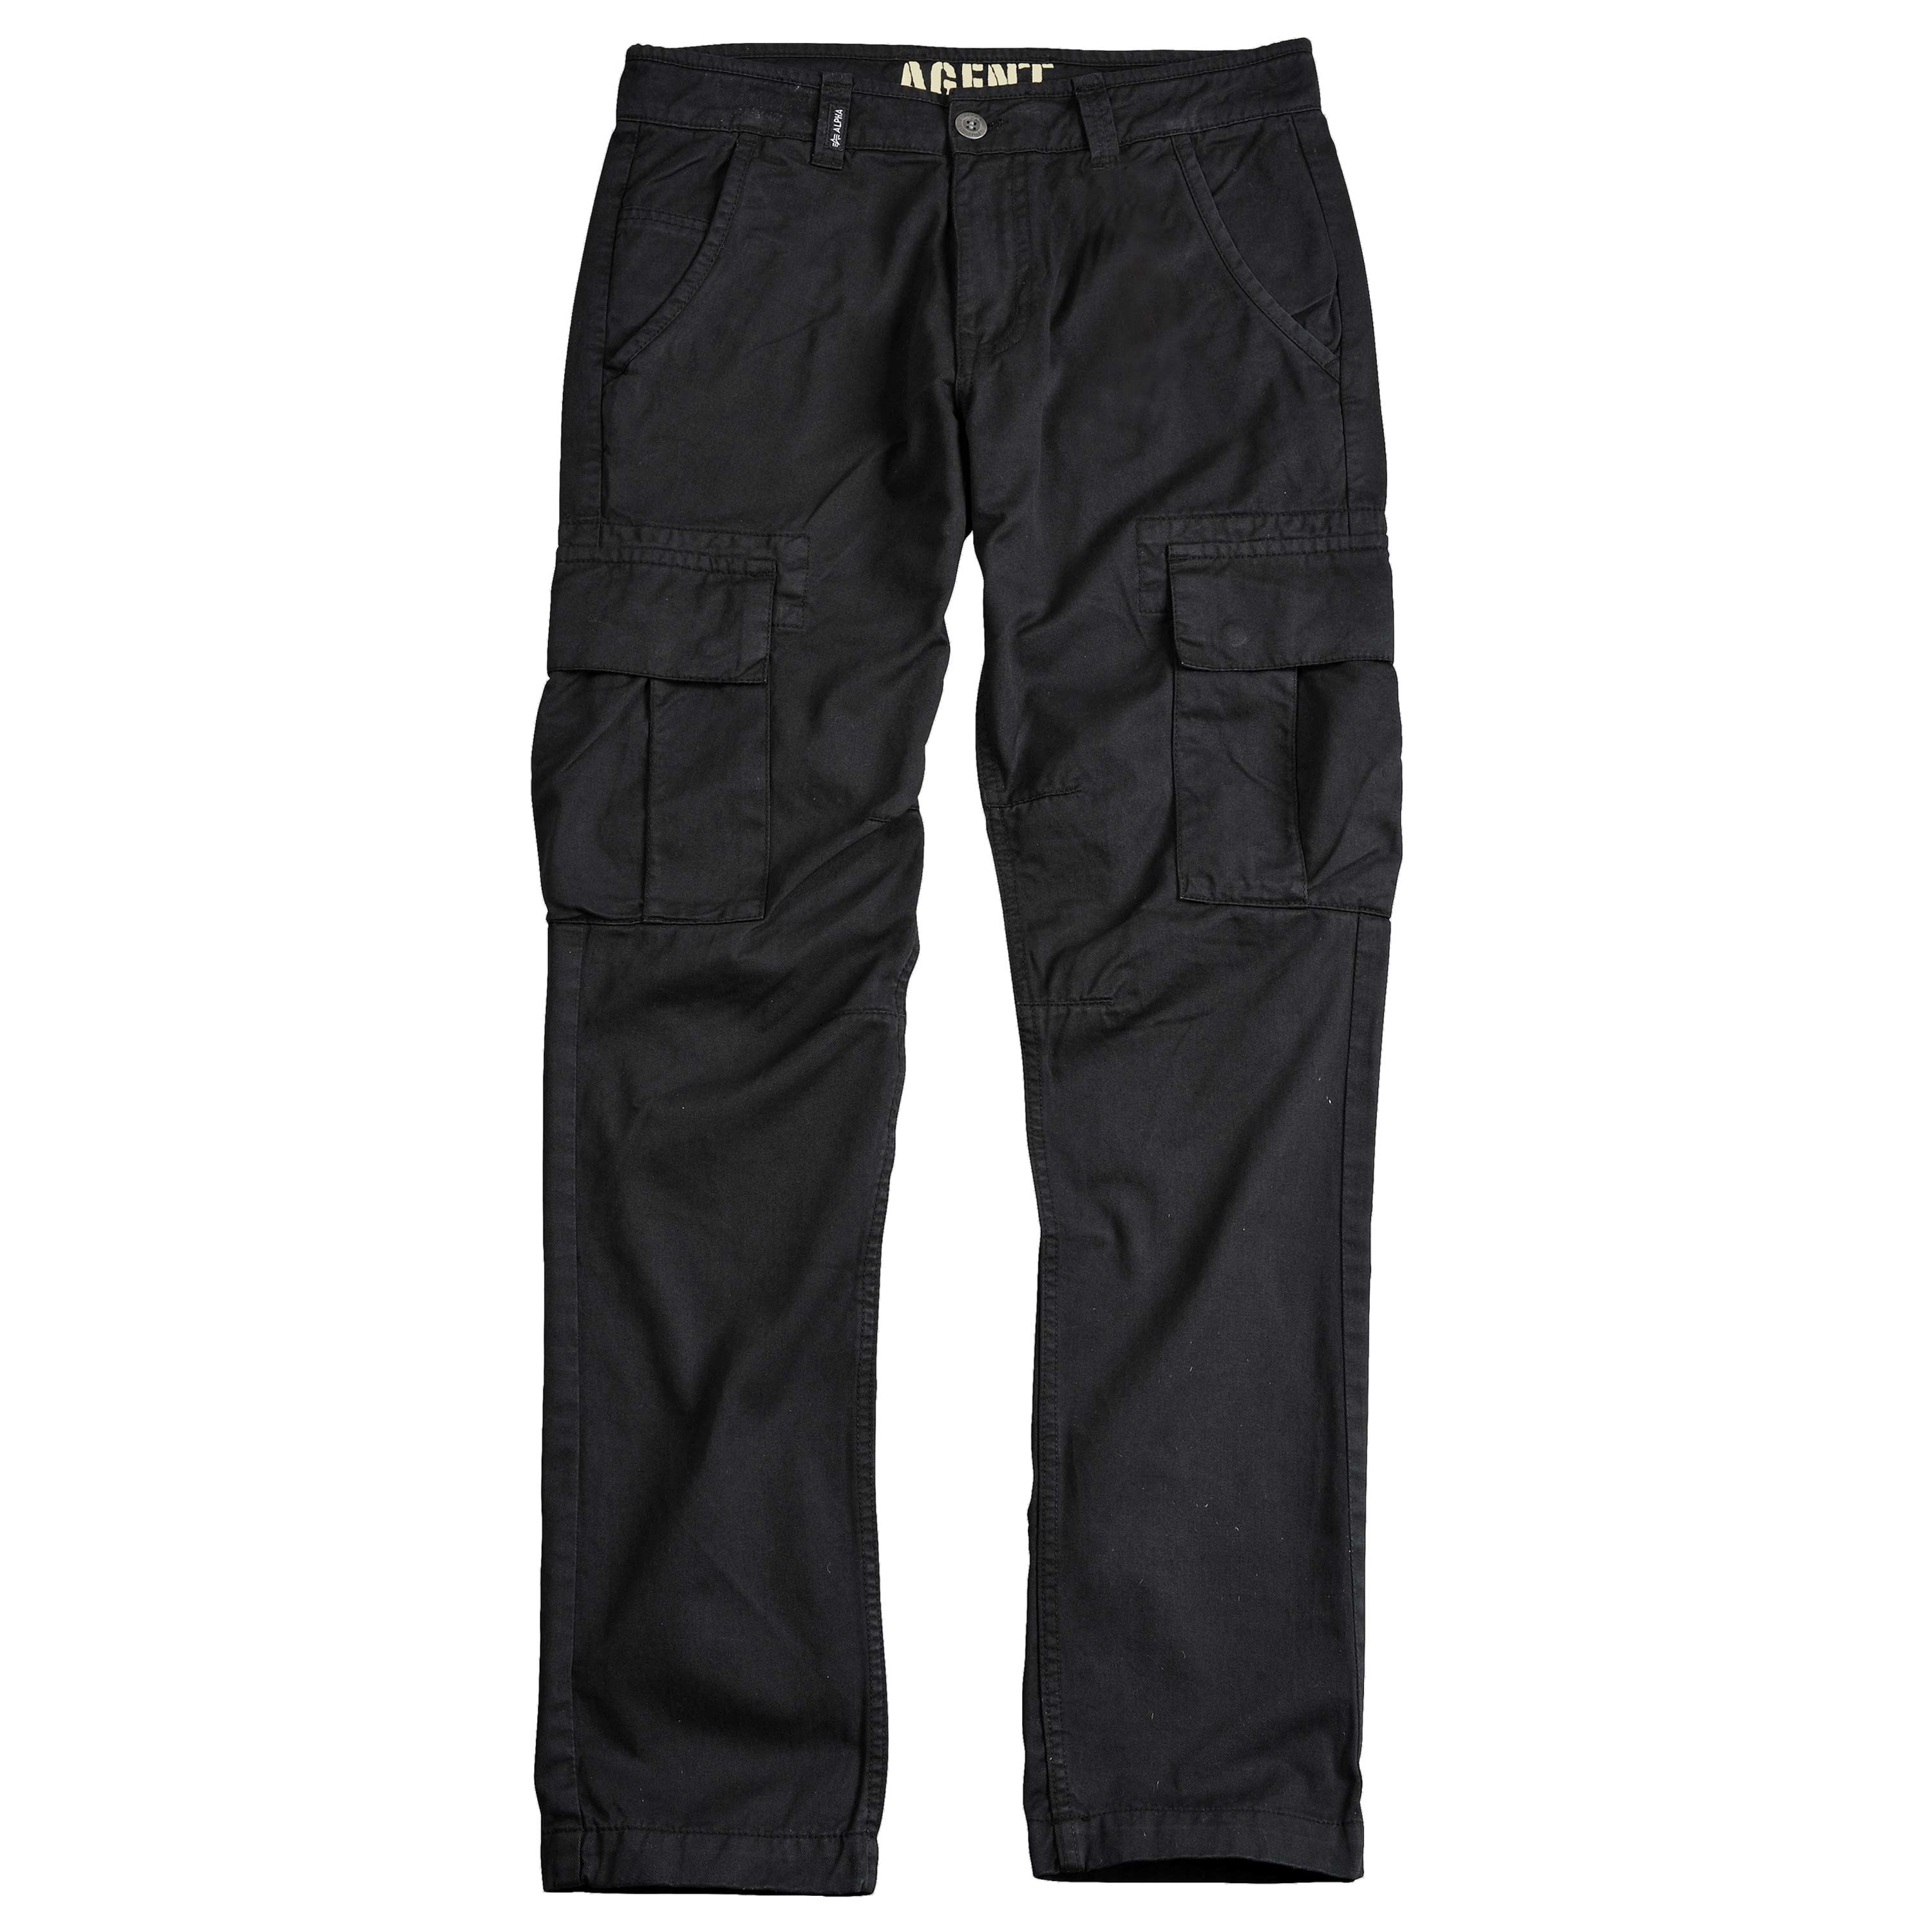 Purchase the Industries black by Alpha Agent ASMC Pants